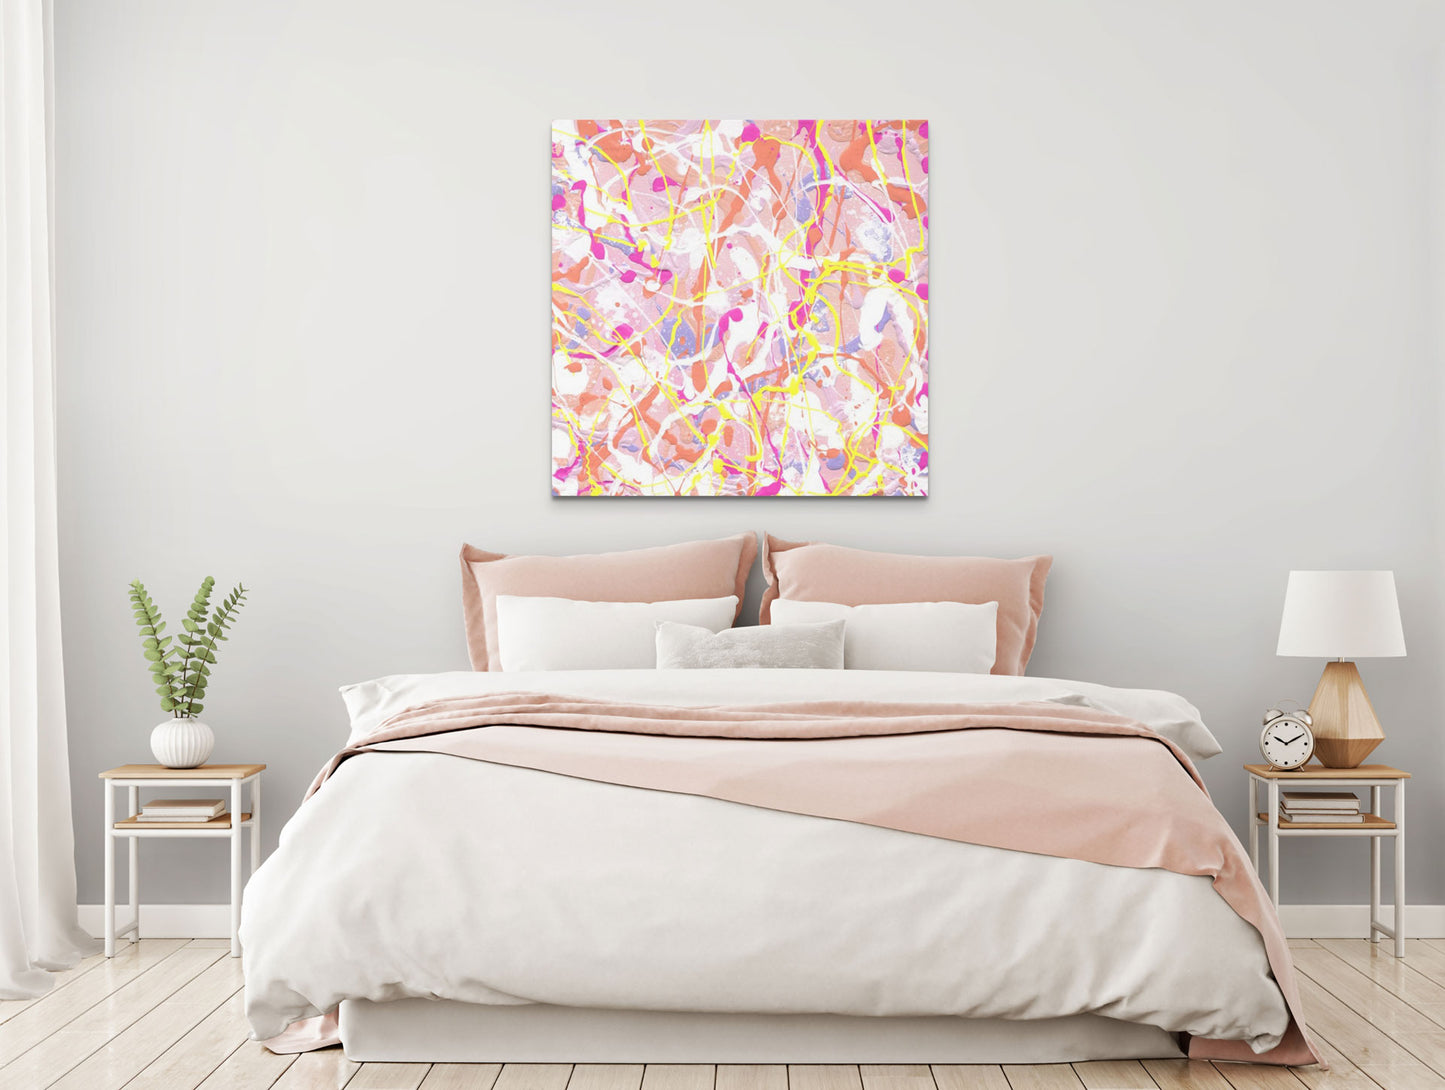 'Cupcake III'  Fine Art Canvas Print, Unframed, hanging above bed with pink and white linen. Large Prints Available up to 100x100cm